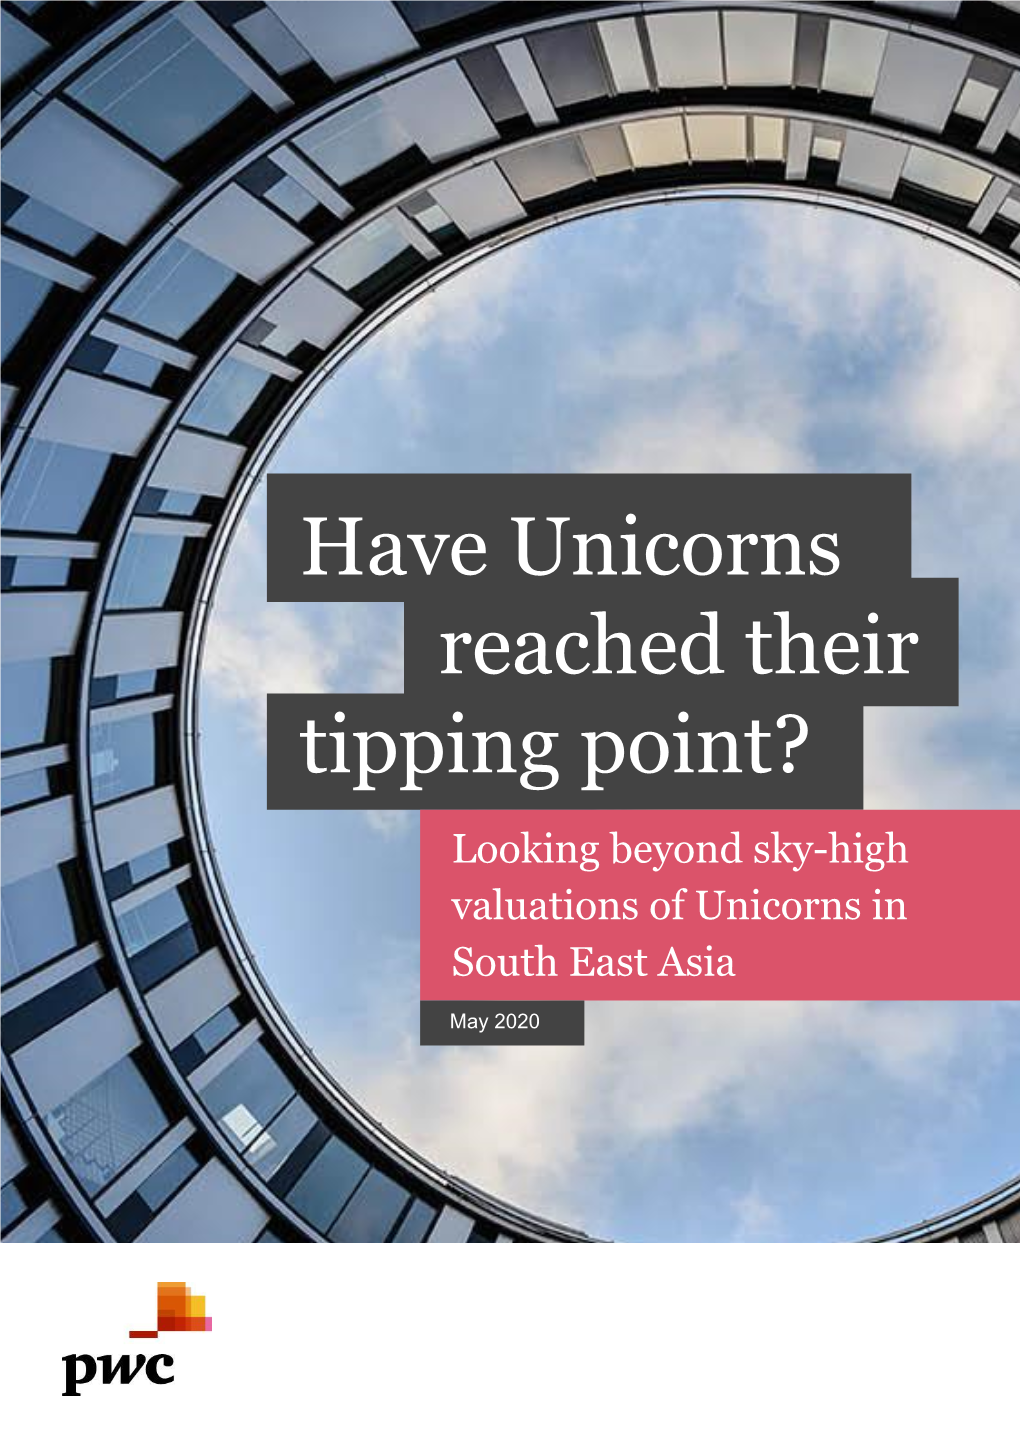 Have Unicorns Reached Their Tipping Point? Looking Beyond Sky-High Valuations of Unicorns in South East Asia